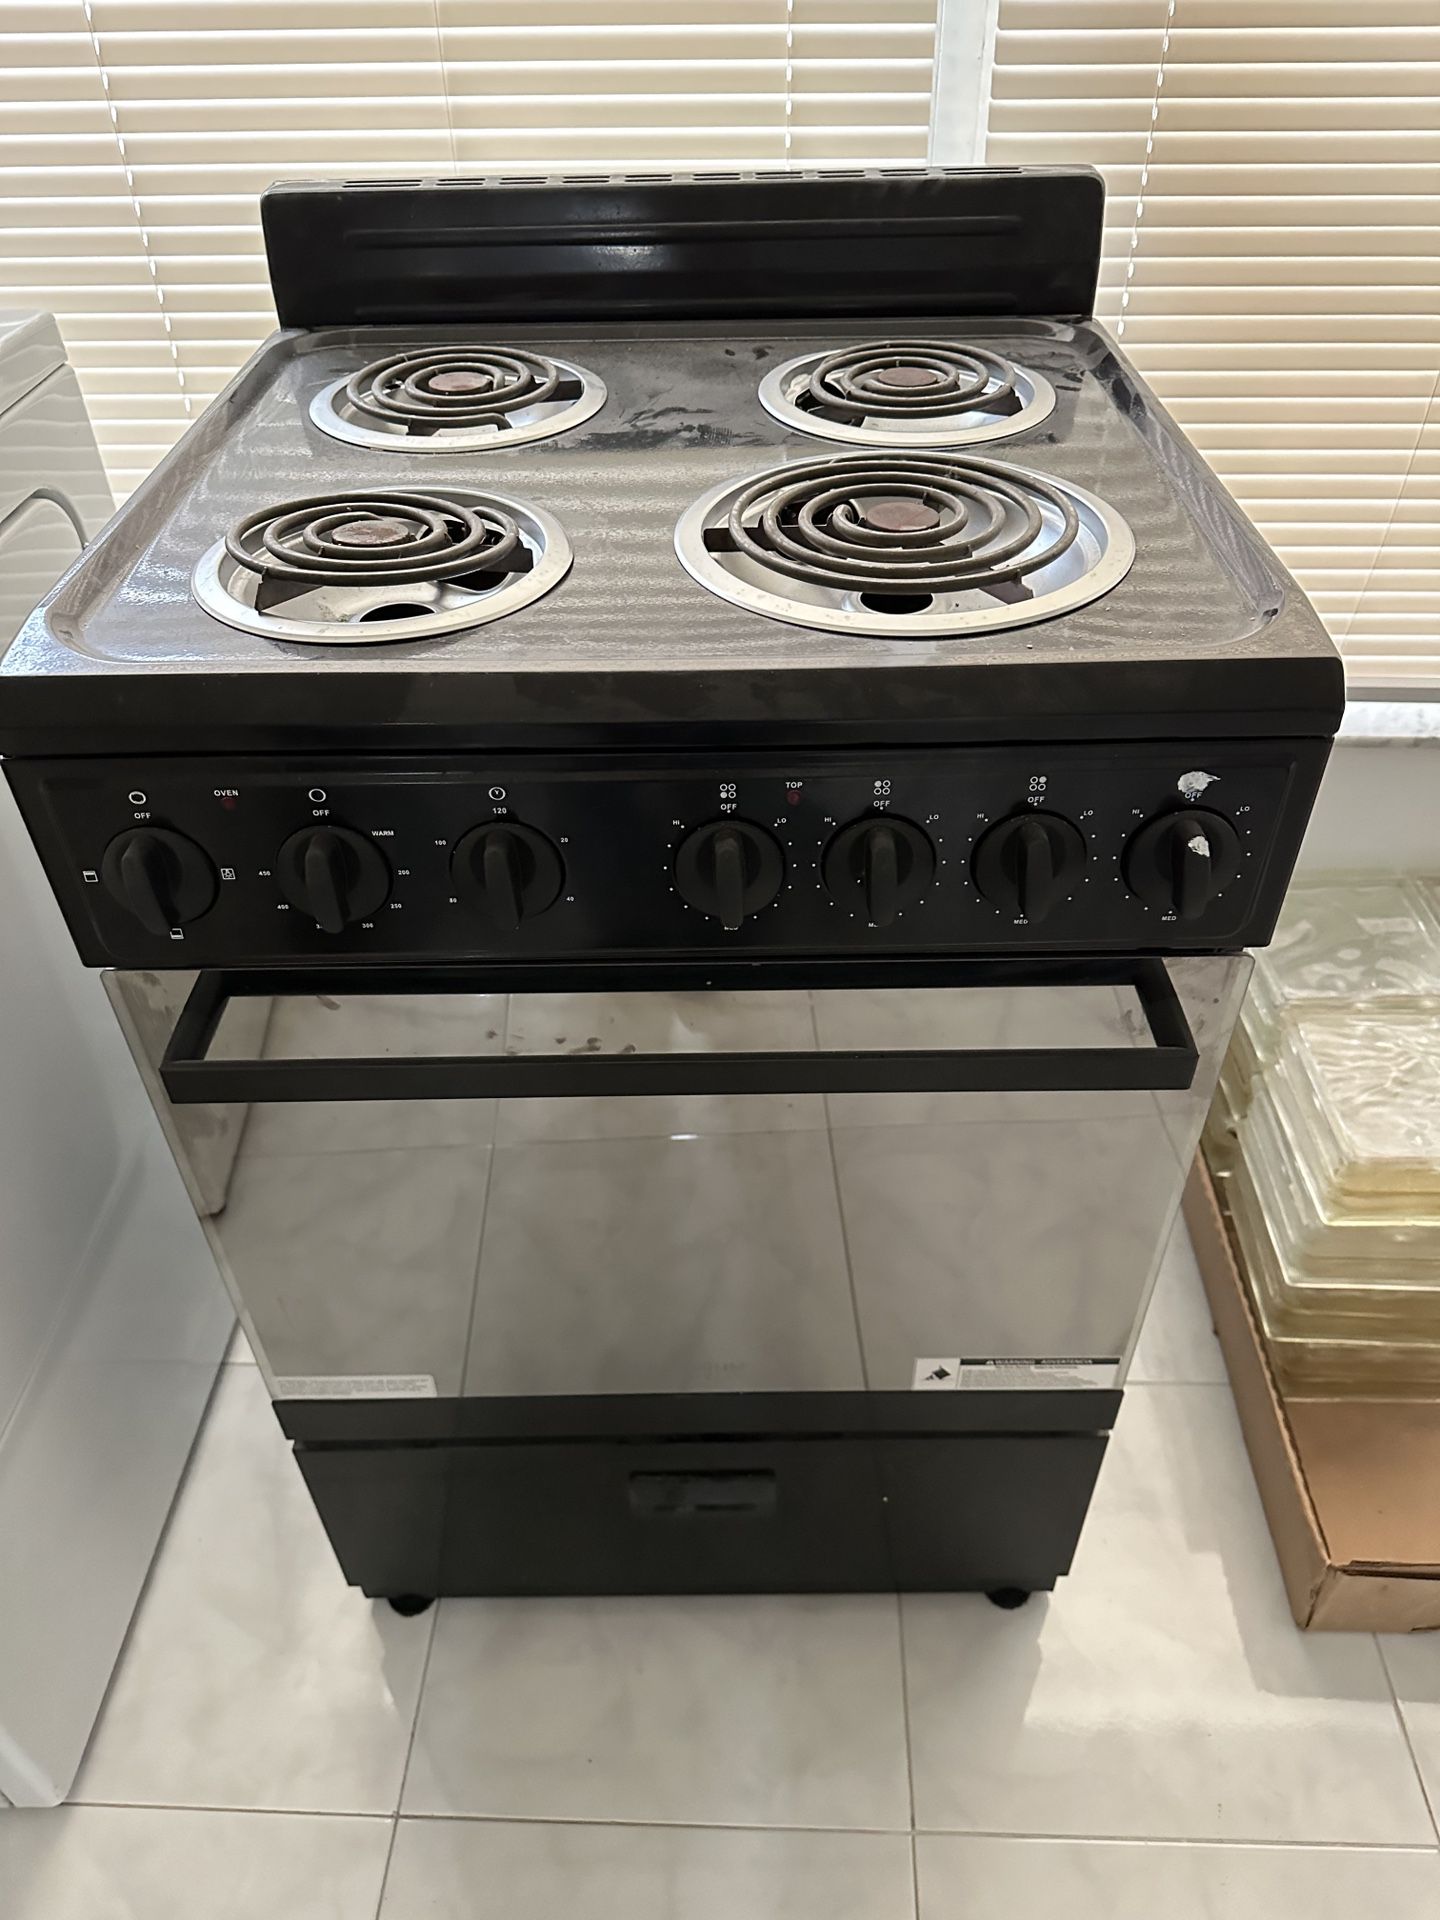 Stove For Sale 